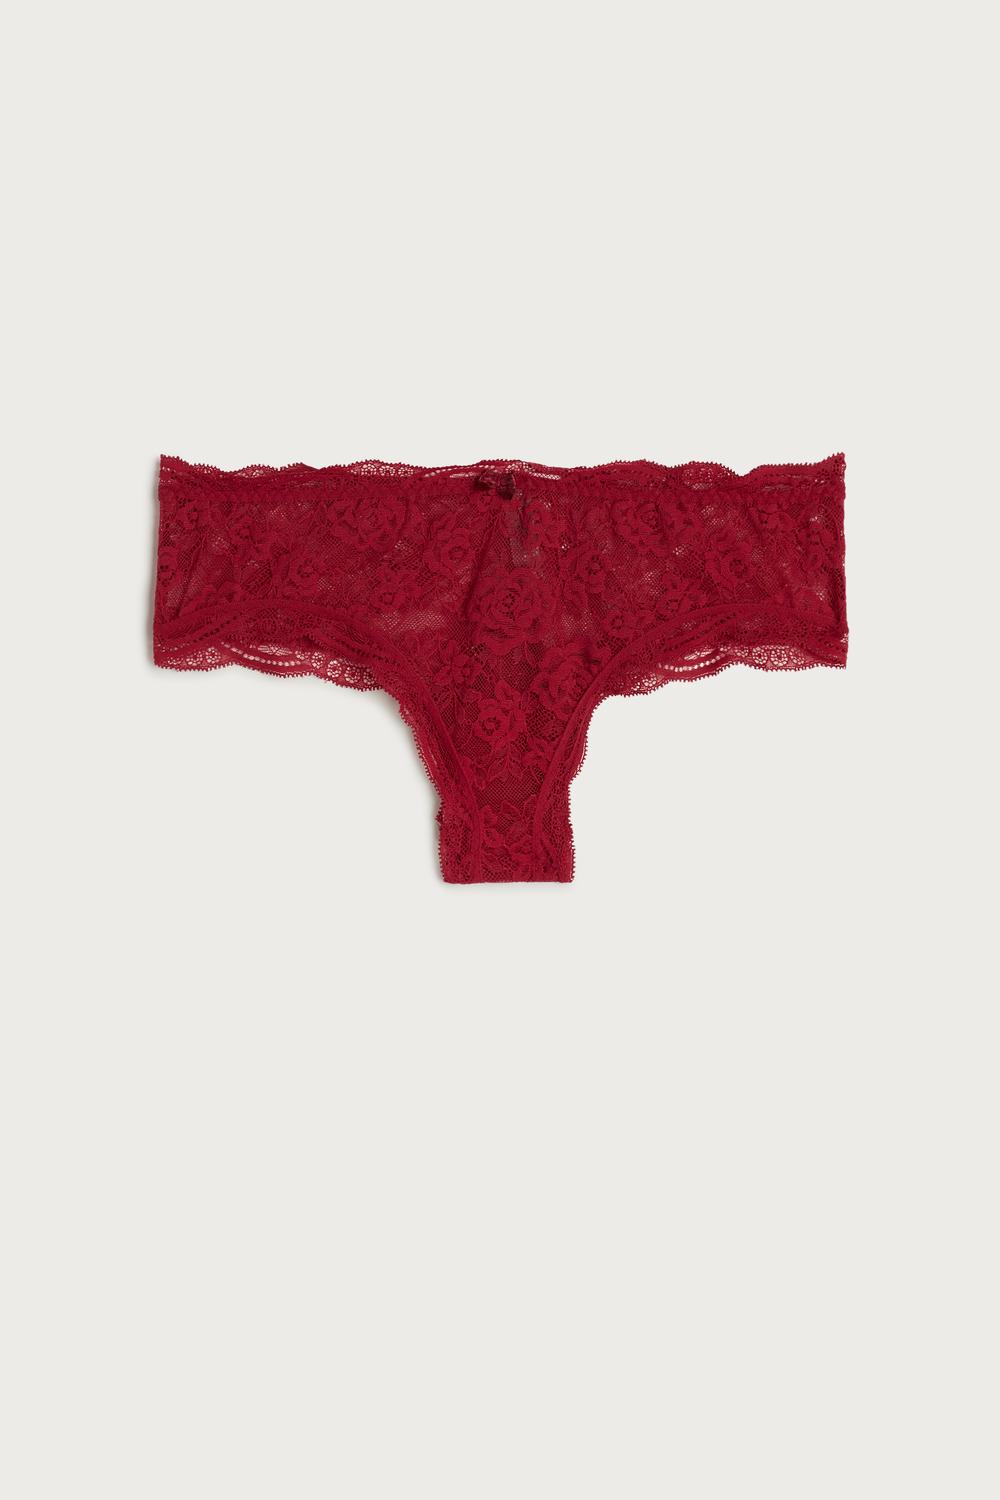 Lace French Knickers - Intimissimi